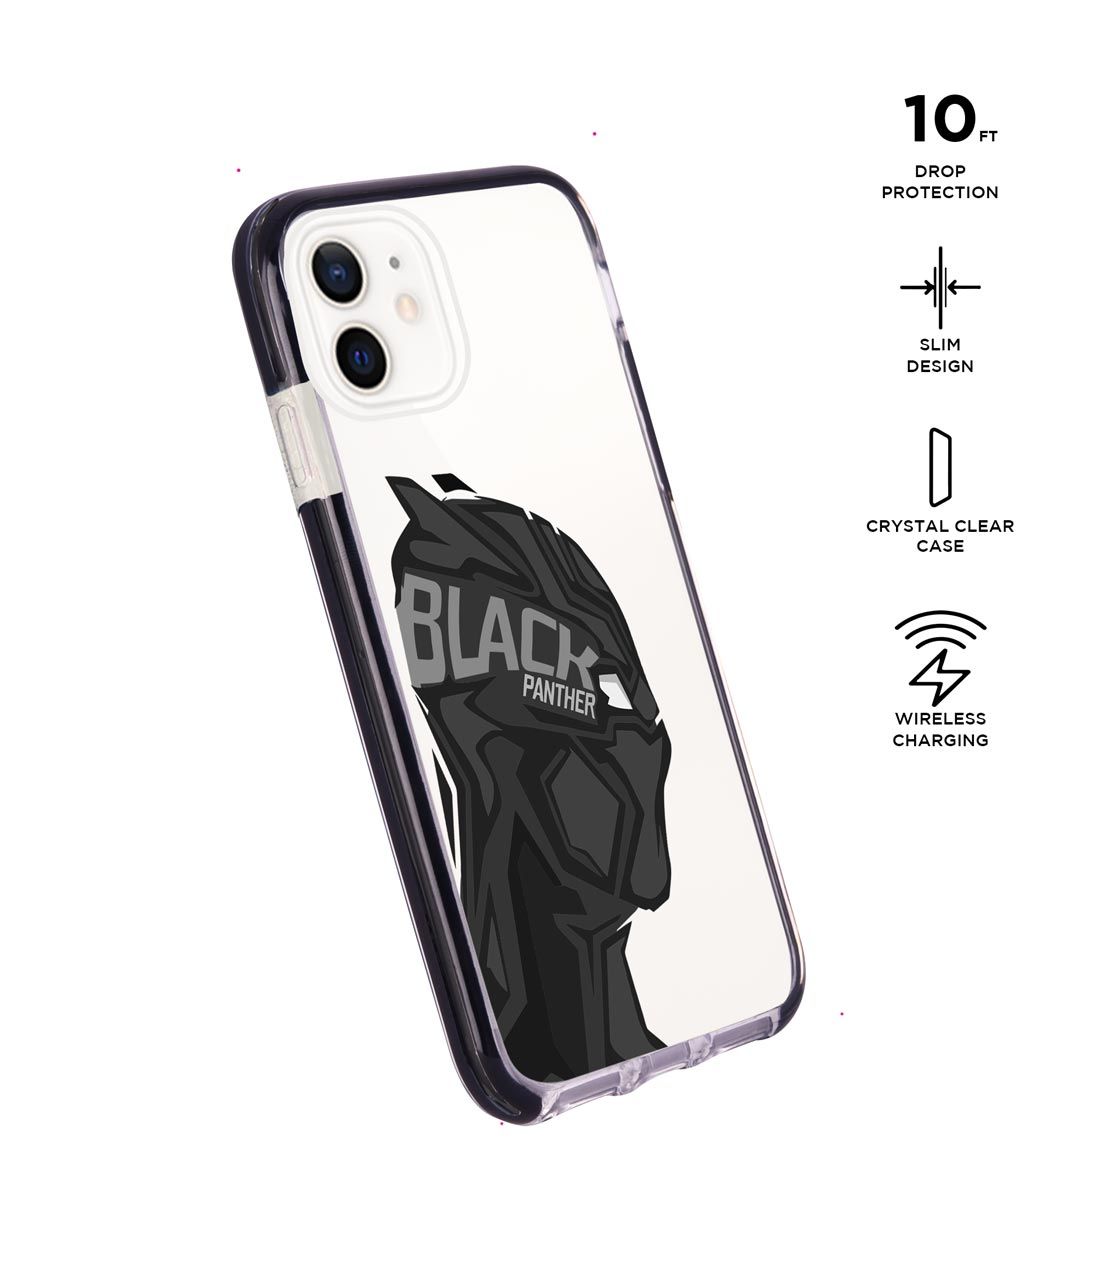 Black Panther Art - Extreme Case for iPhone 12